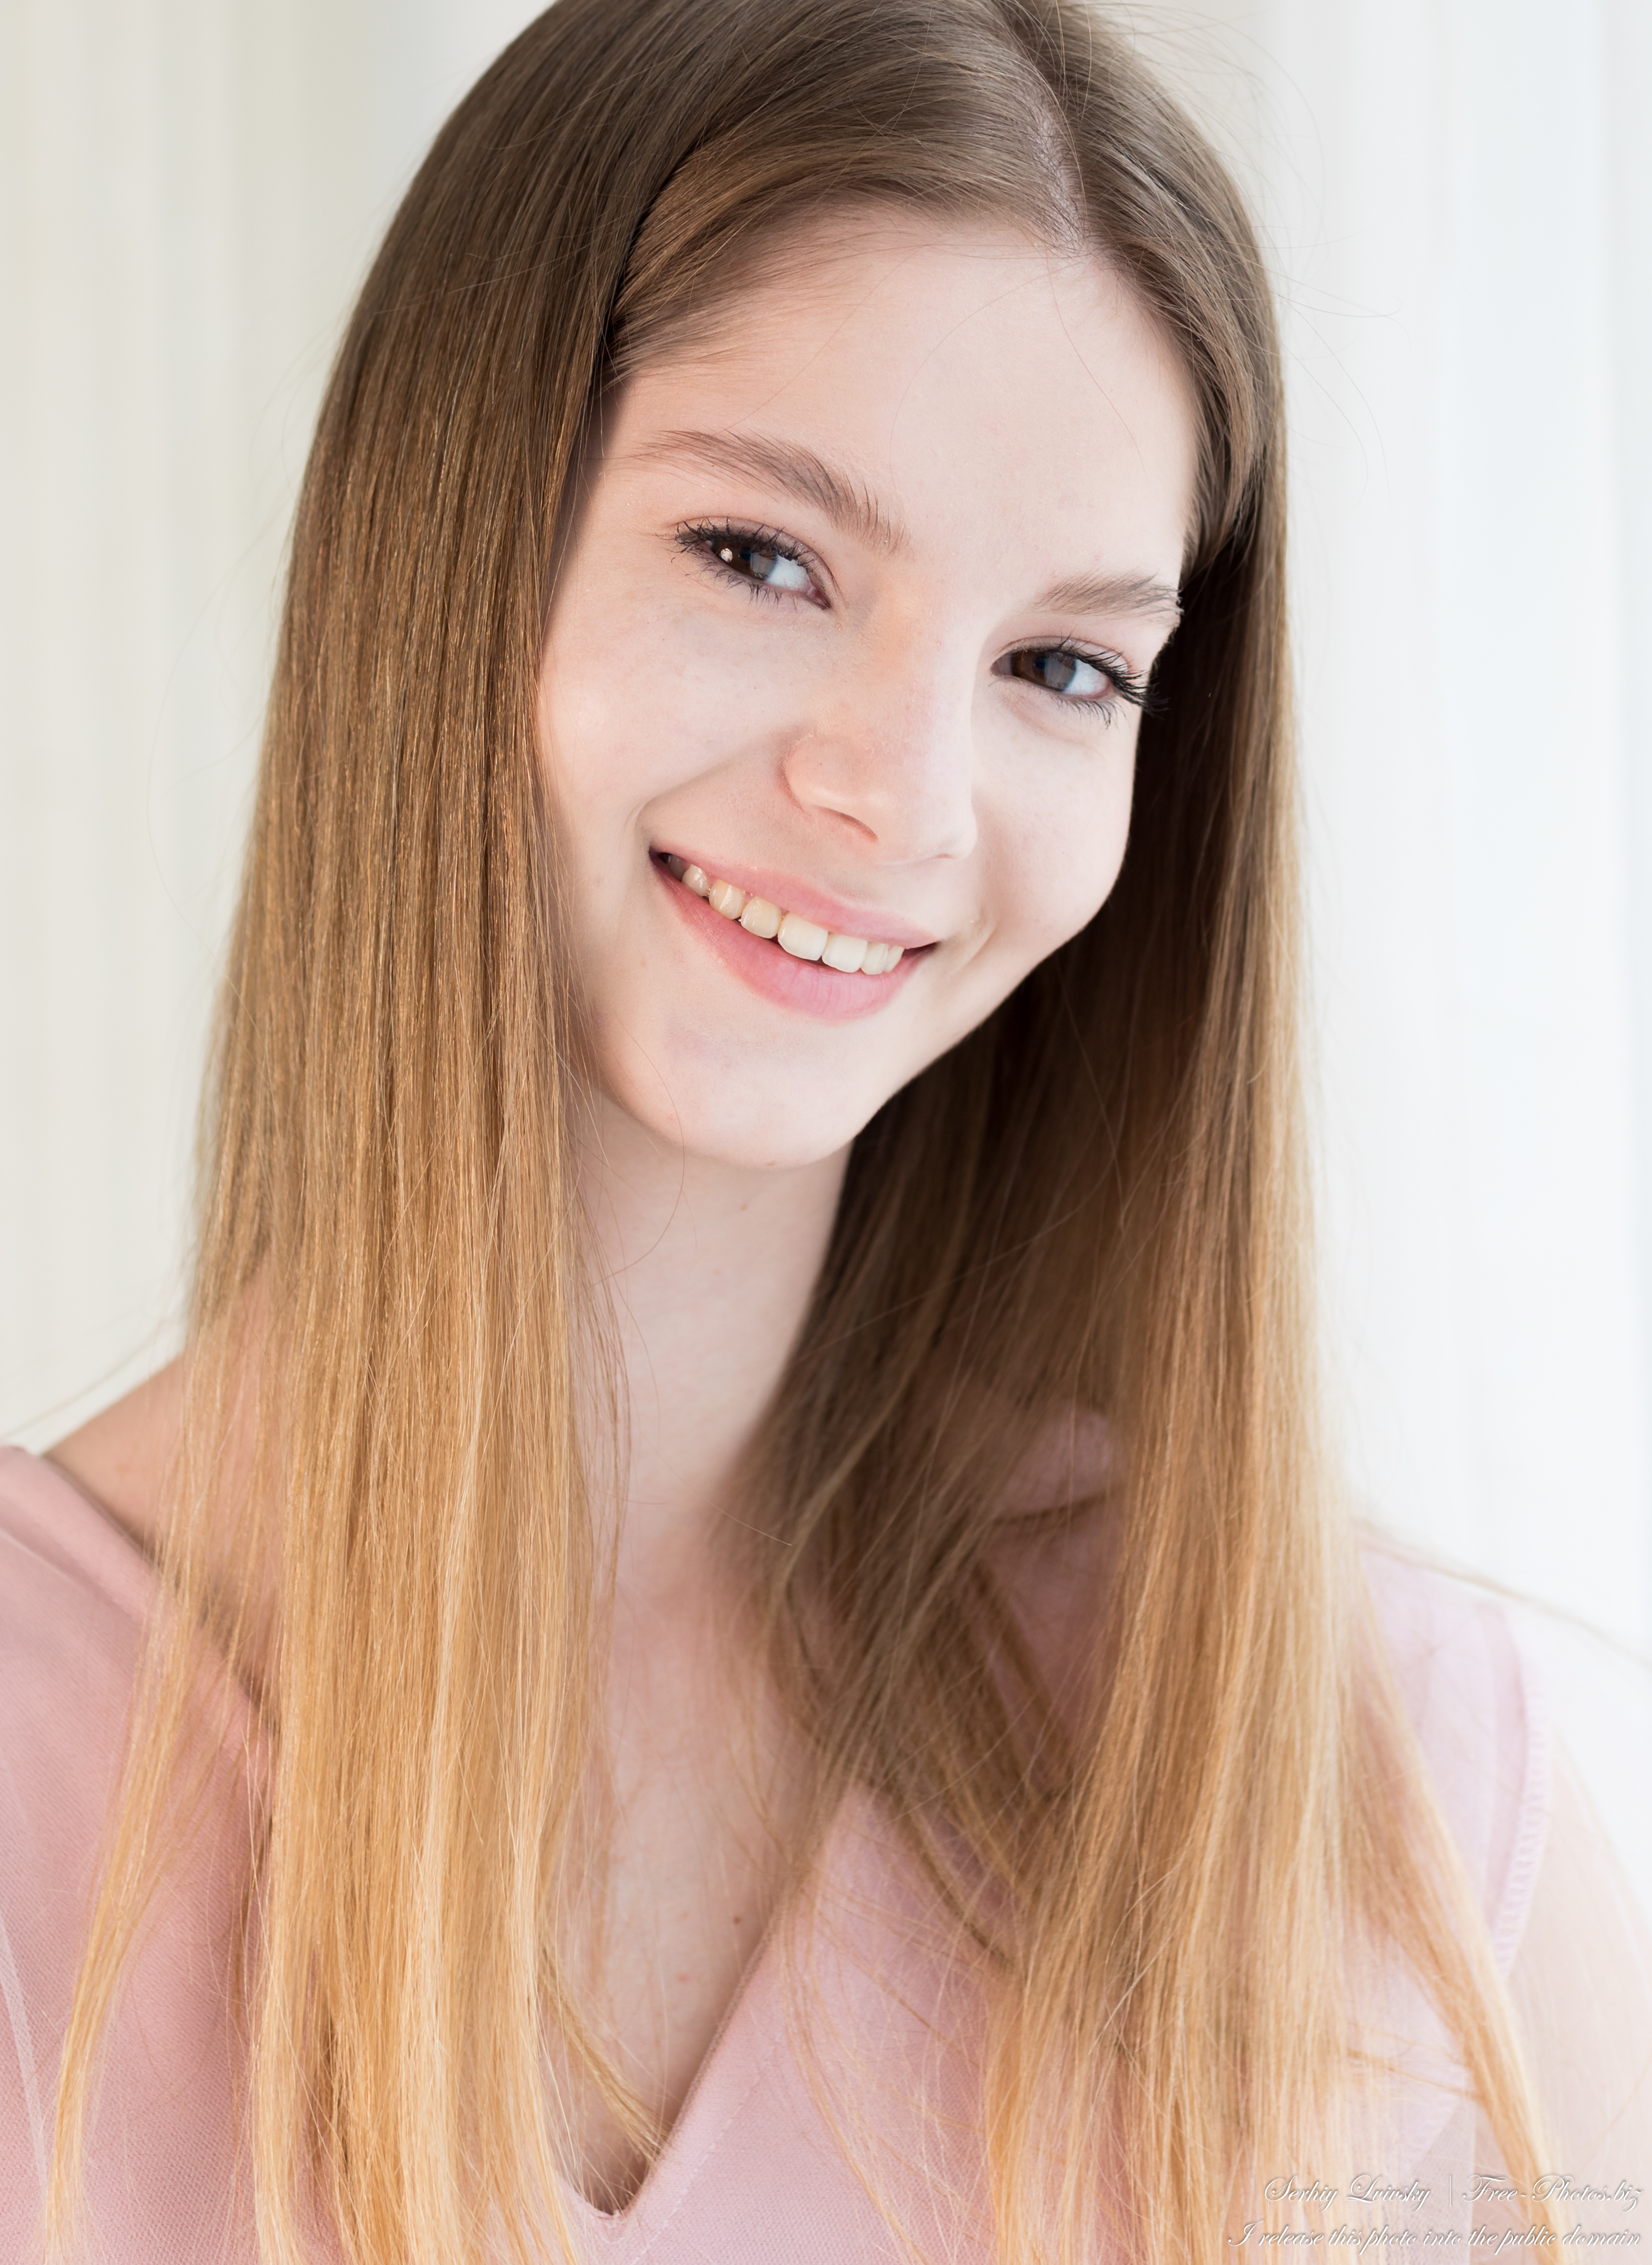 Vika - an 18-year-old girl with natural fair hair photographed in March 2023 by Serhiy Lvivsky, picture 30